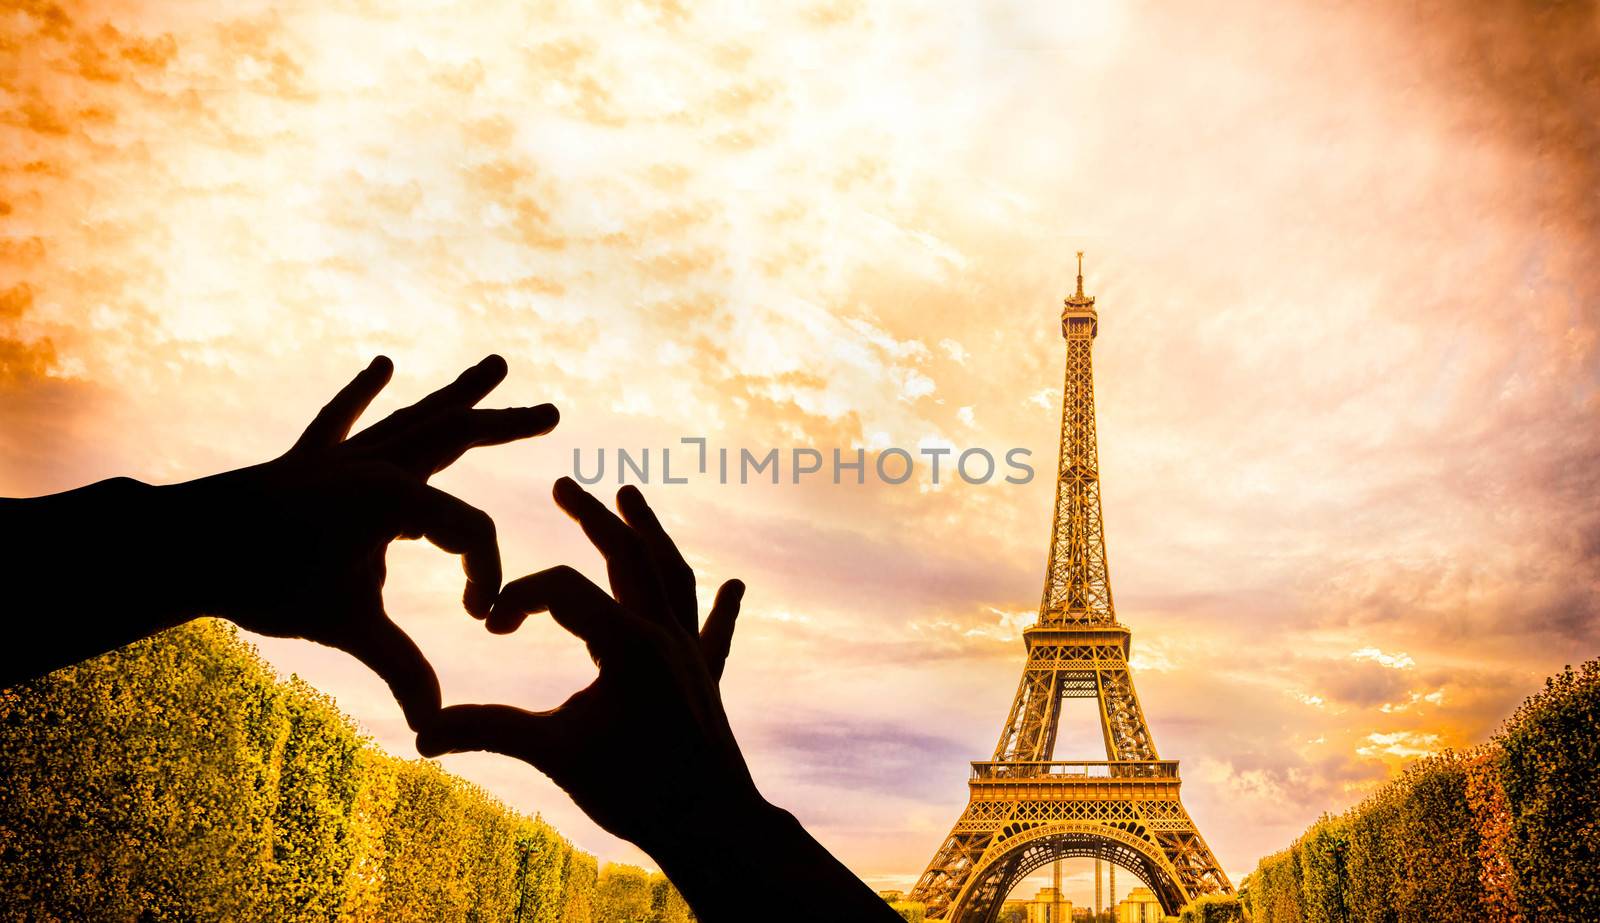 The Eiffel Tower in Paris and hands in a heart shape by gianliguori